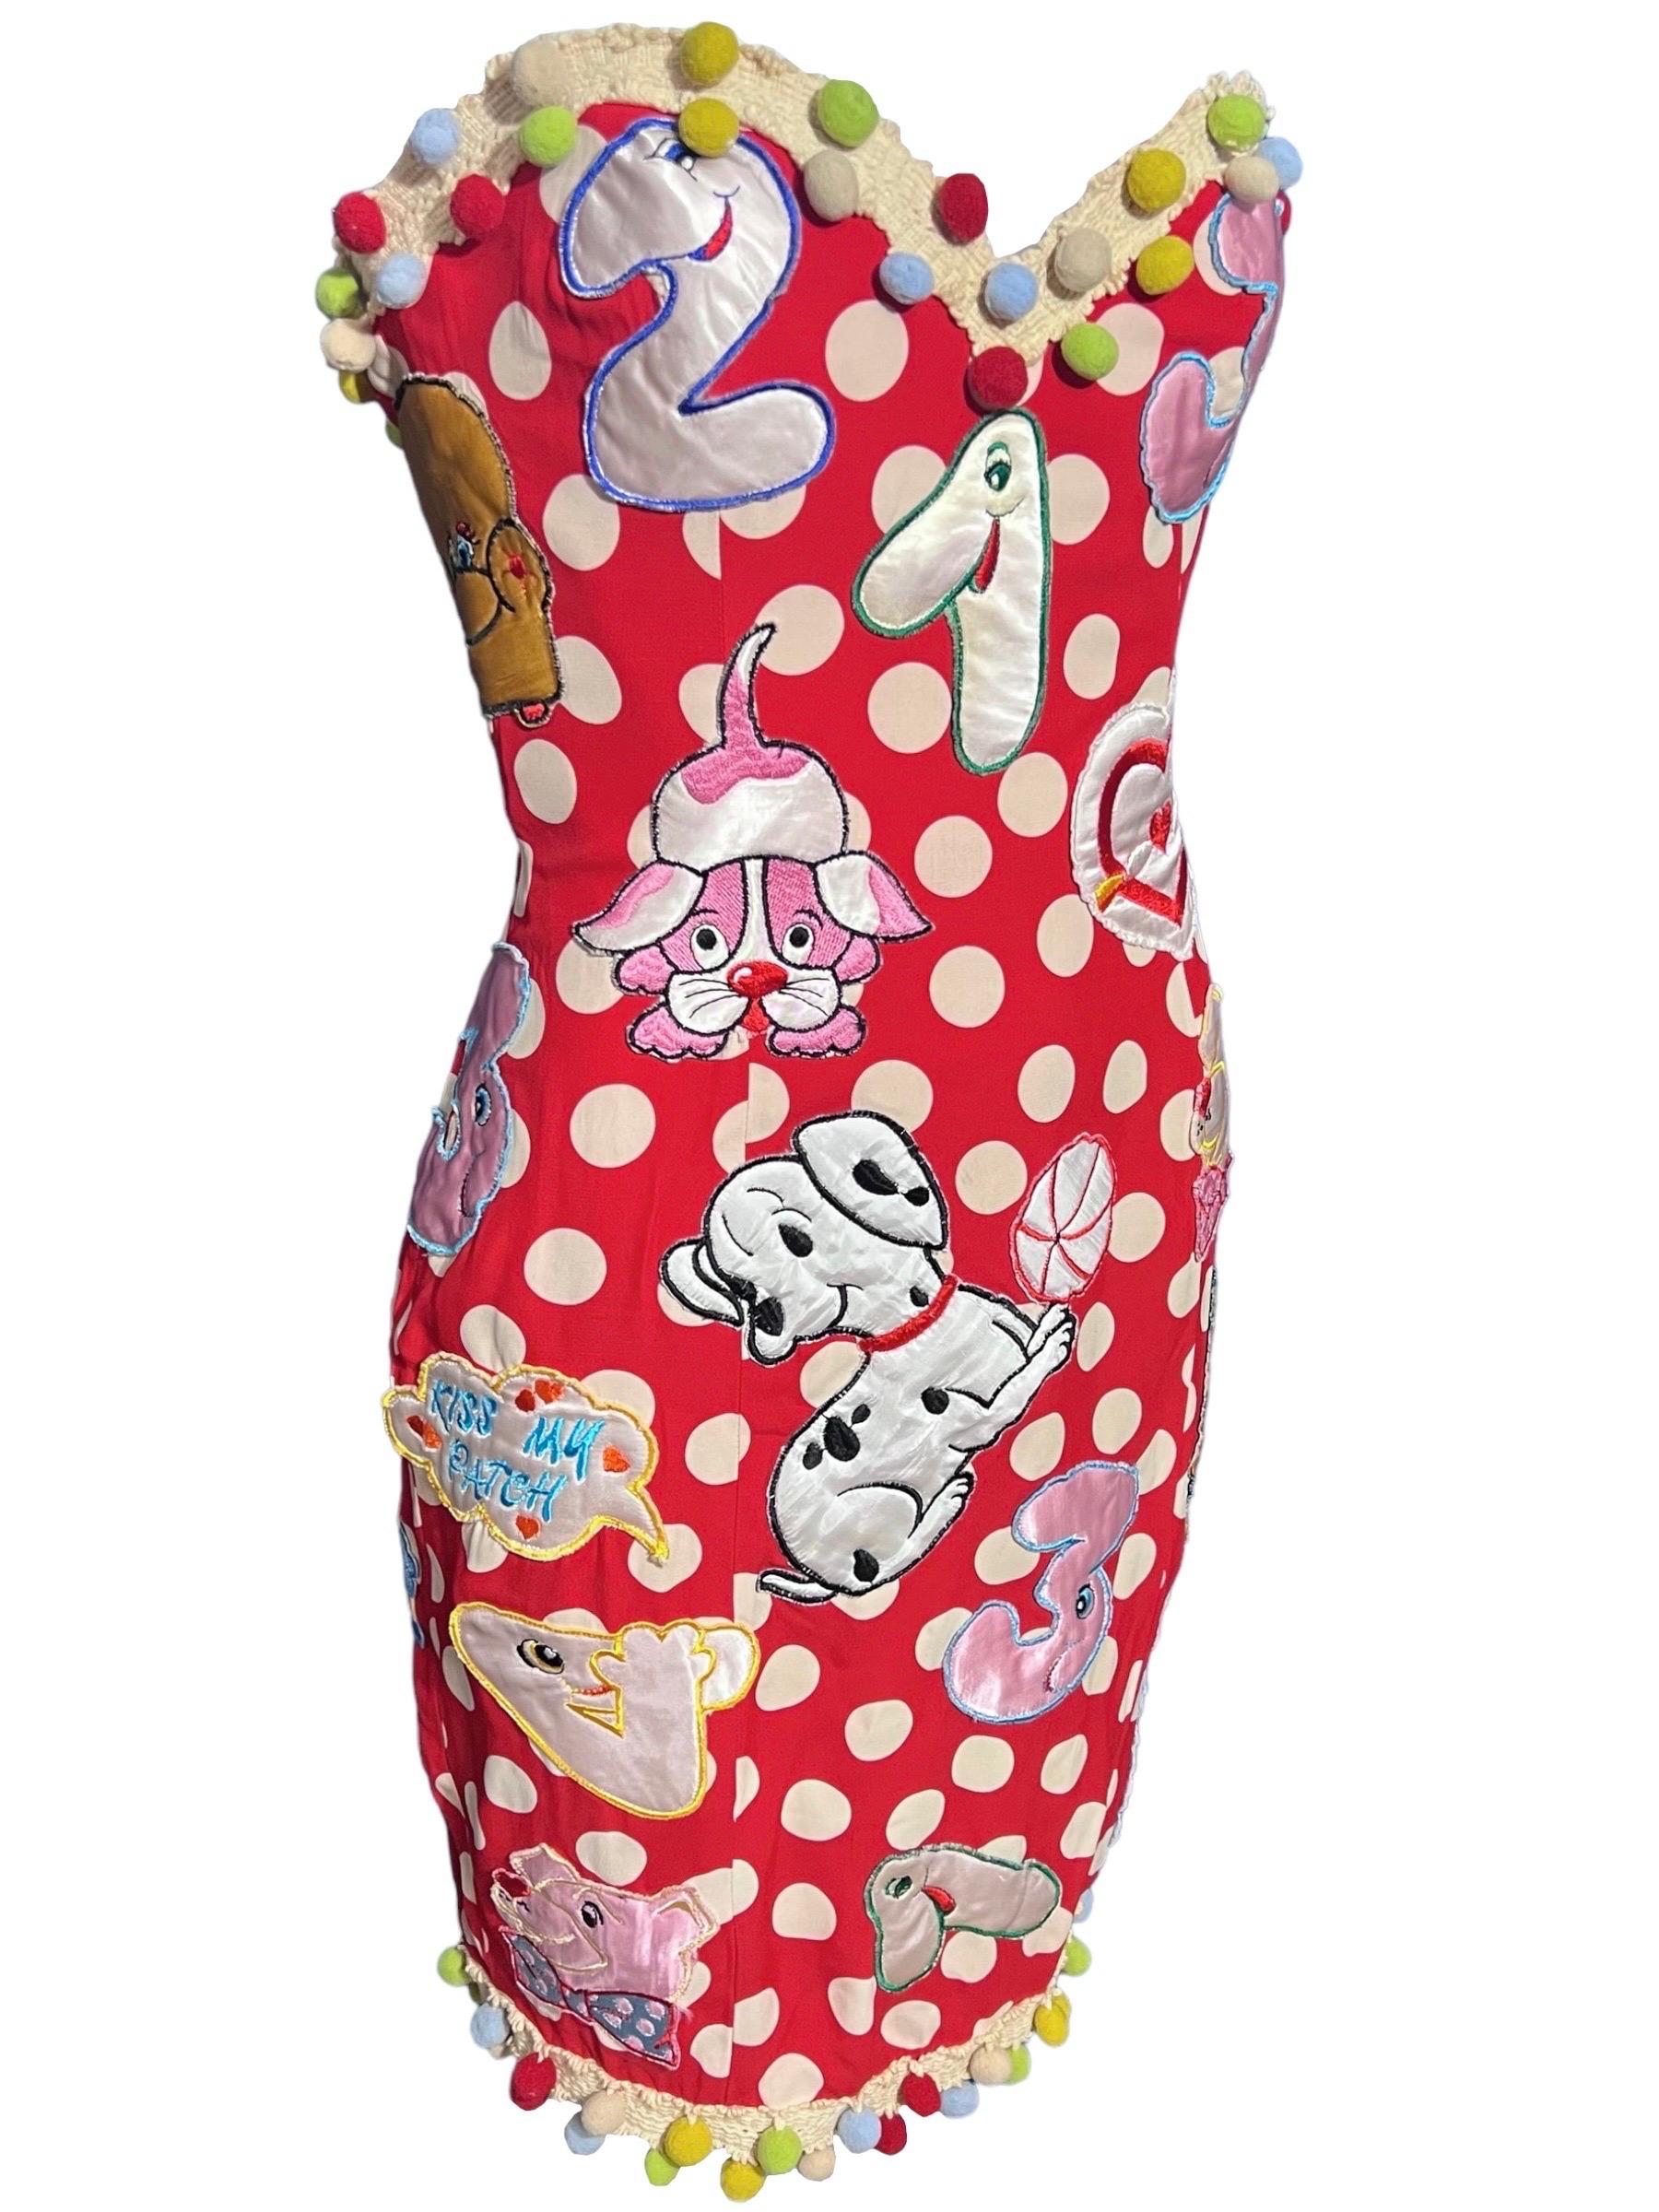 Super fun and whimsical rare 1988 Moschino red and off-white polka dot strapless silk dress embroidered with playful cartoon patches all over the entire dress.
An iconic piece of Franco Moschino history.
Some of the patches include animals, hearts,